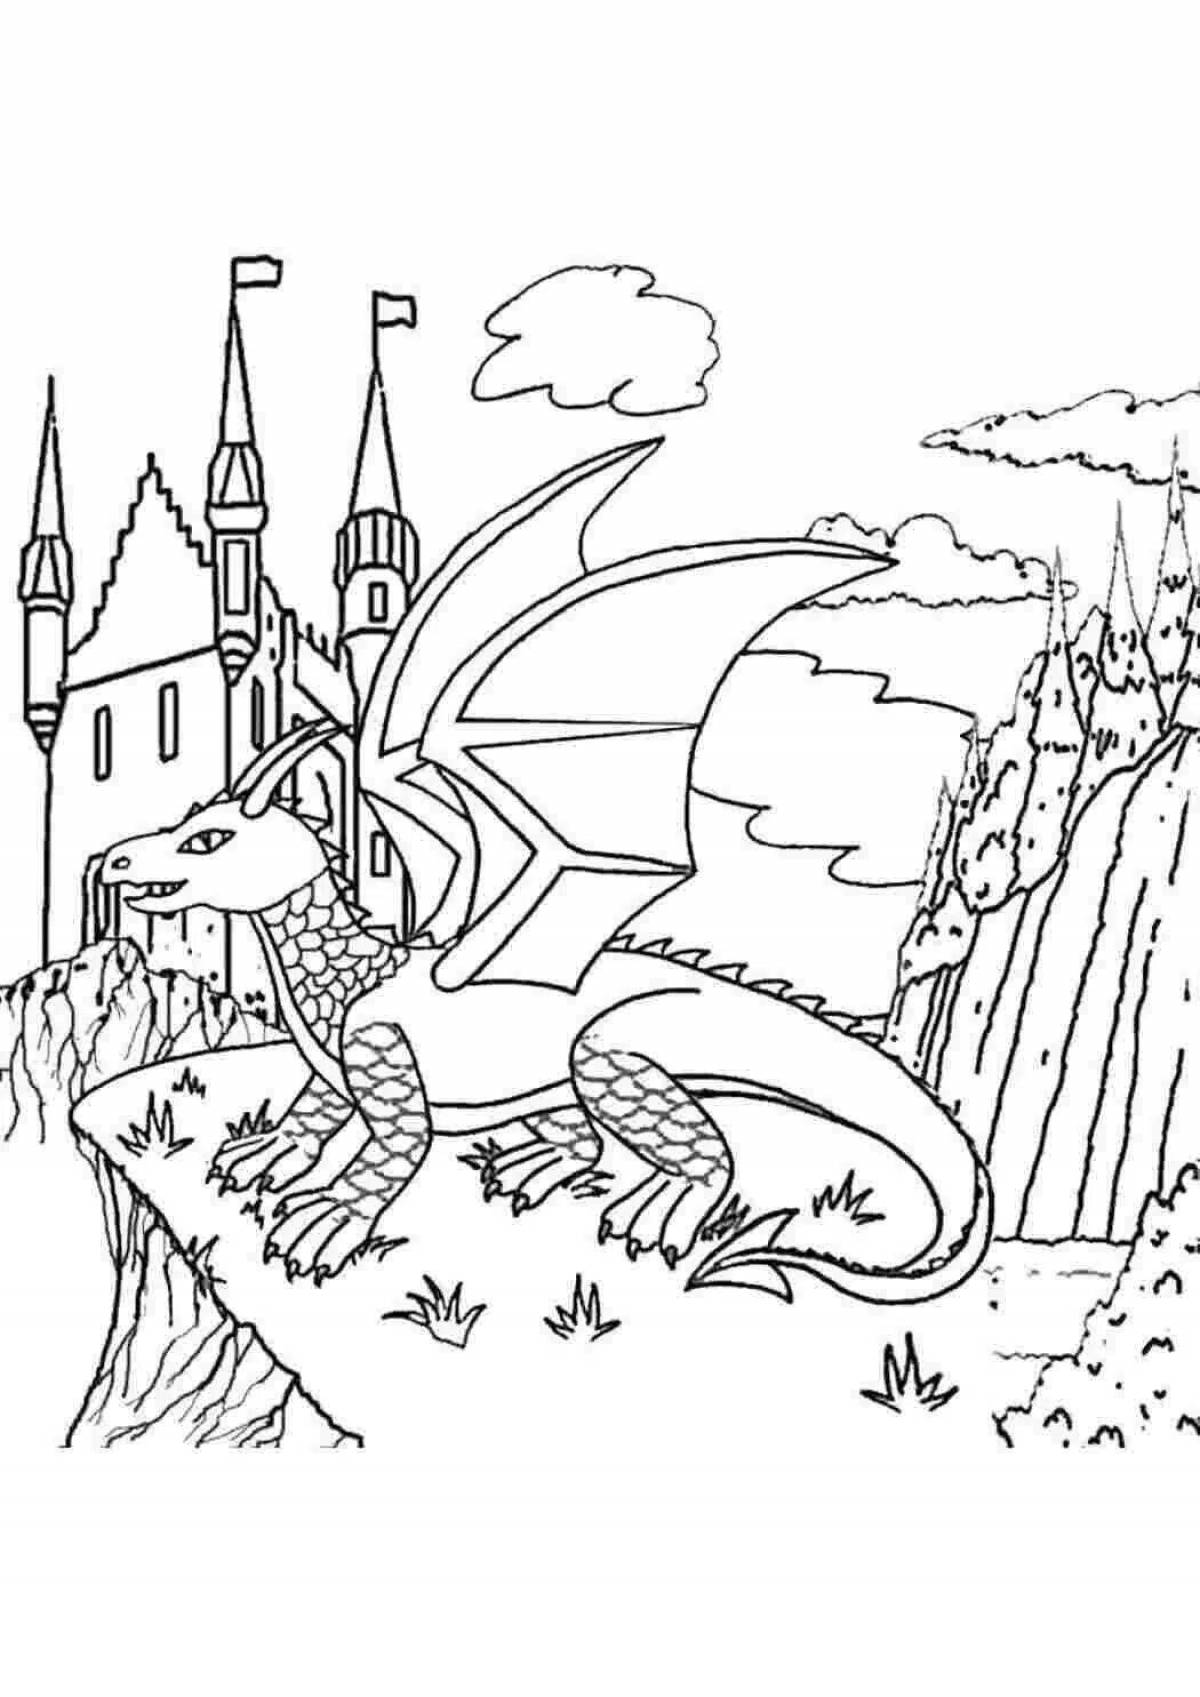 Fabulous dragon coloring pages for 6-7 year olds